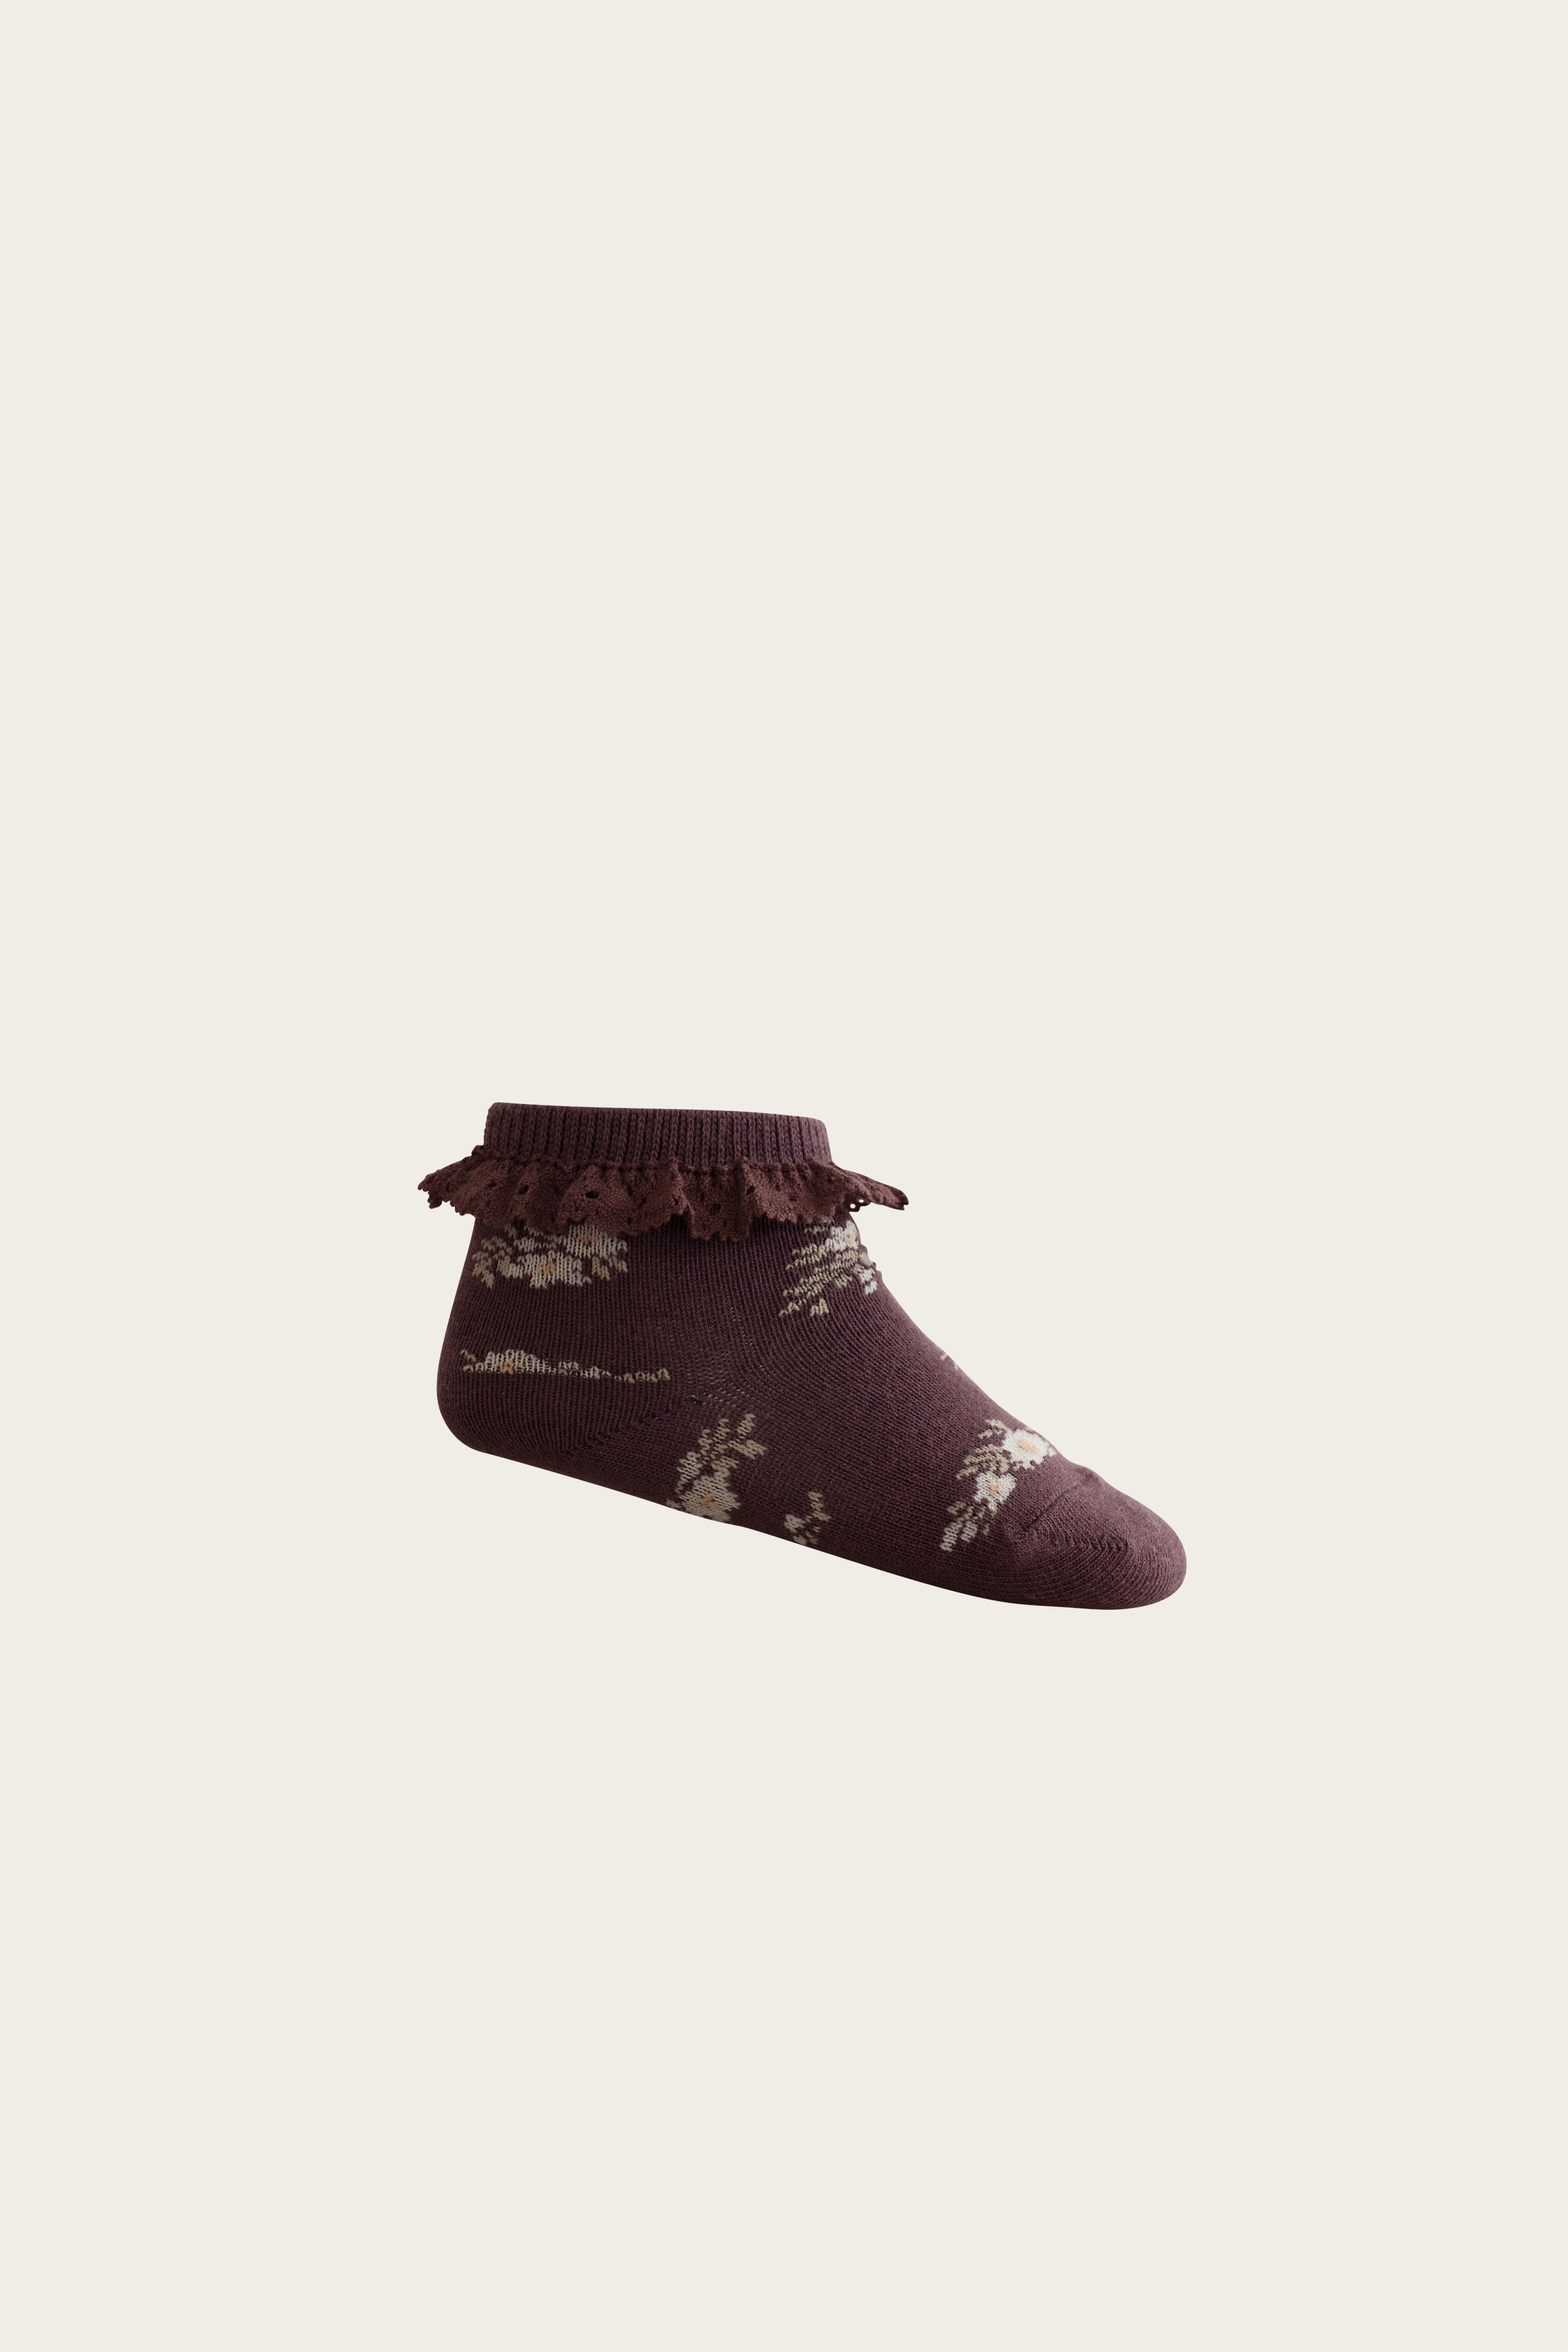 Frill Ankle Sock - Petite Fleur Blackberry-Clothing & Accessories-Jamie Kay-The Bay Room